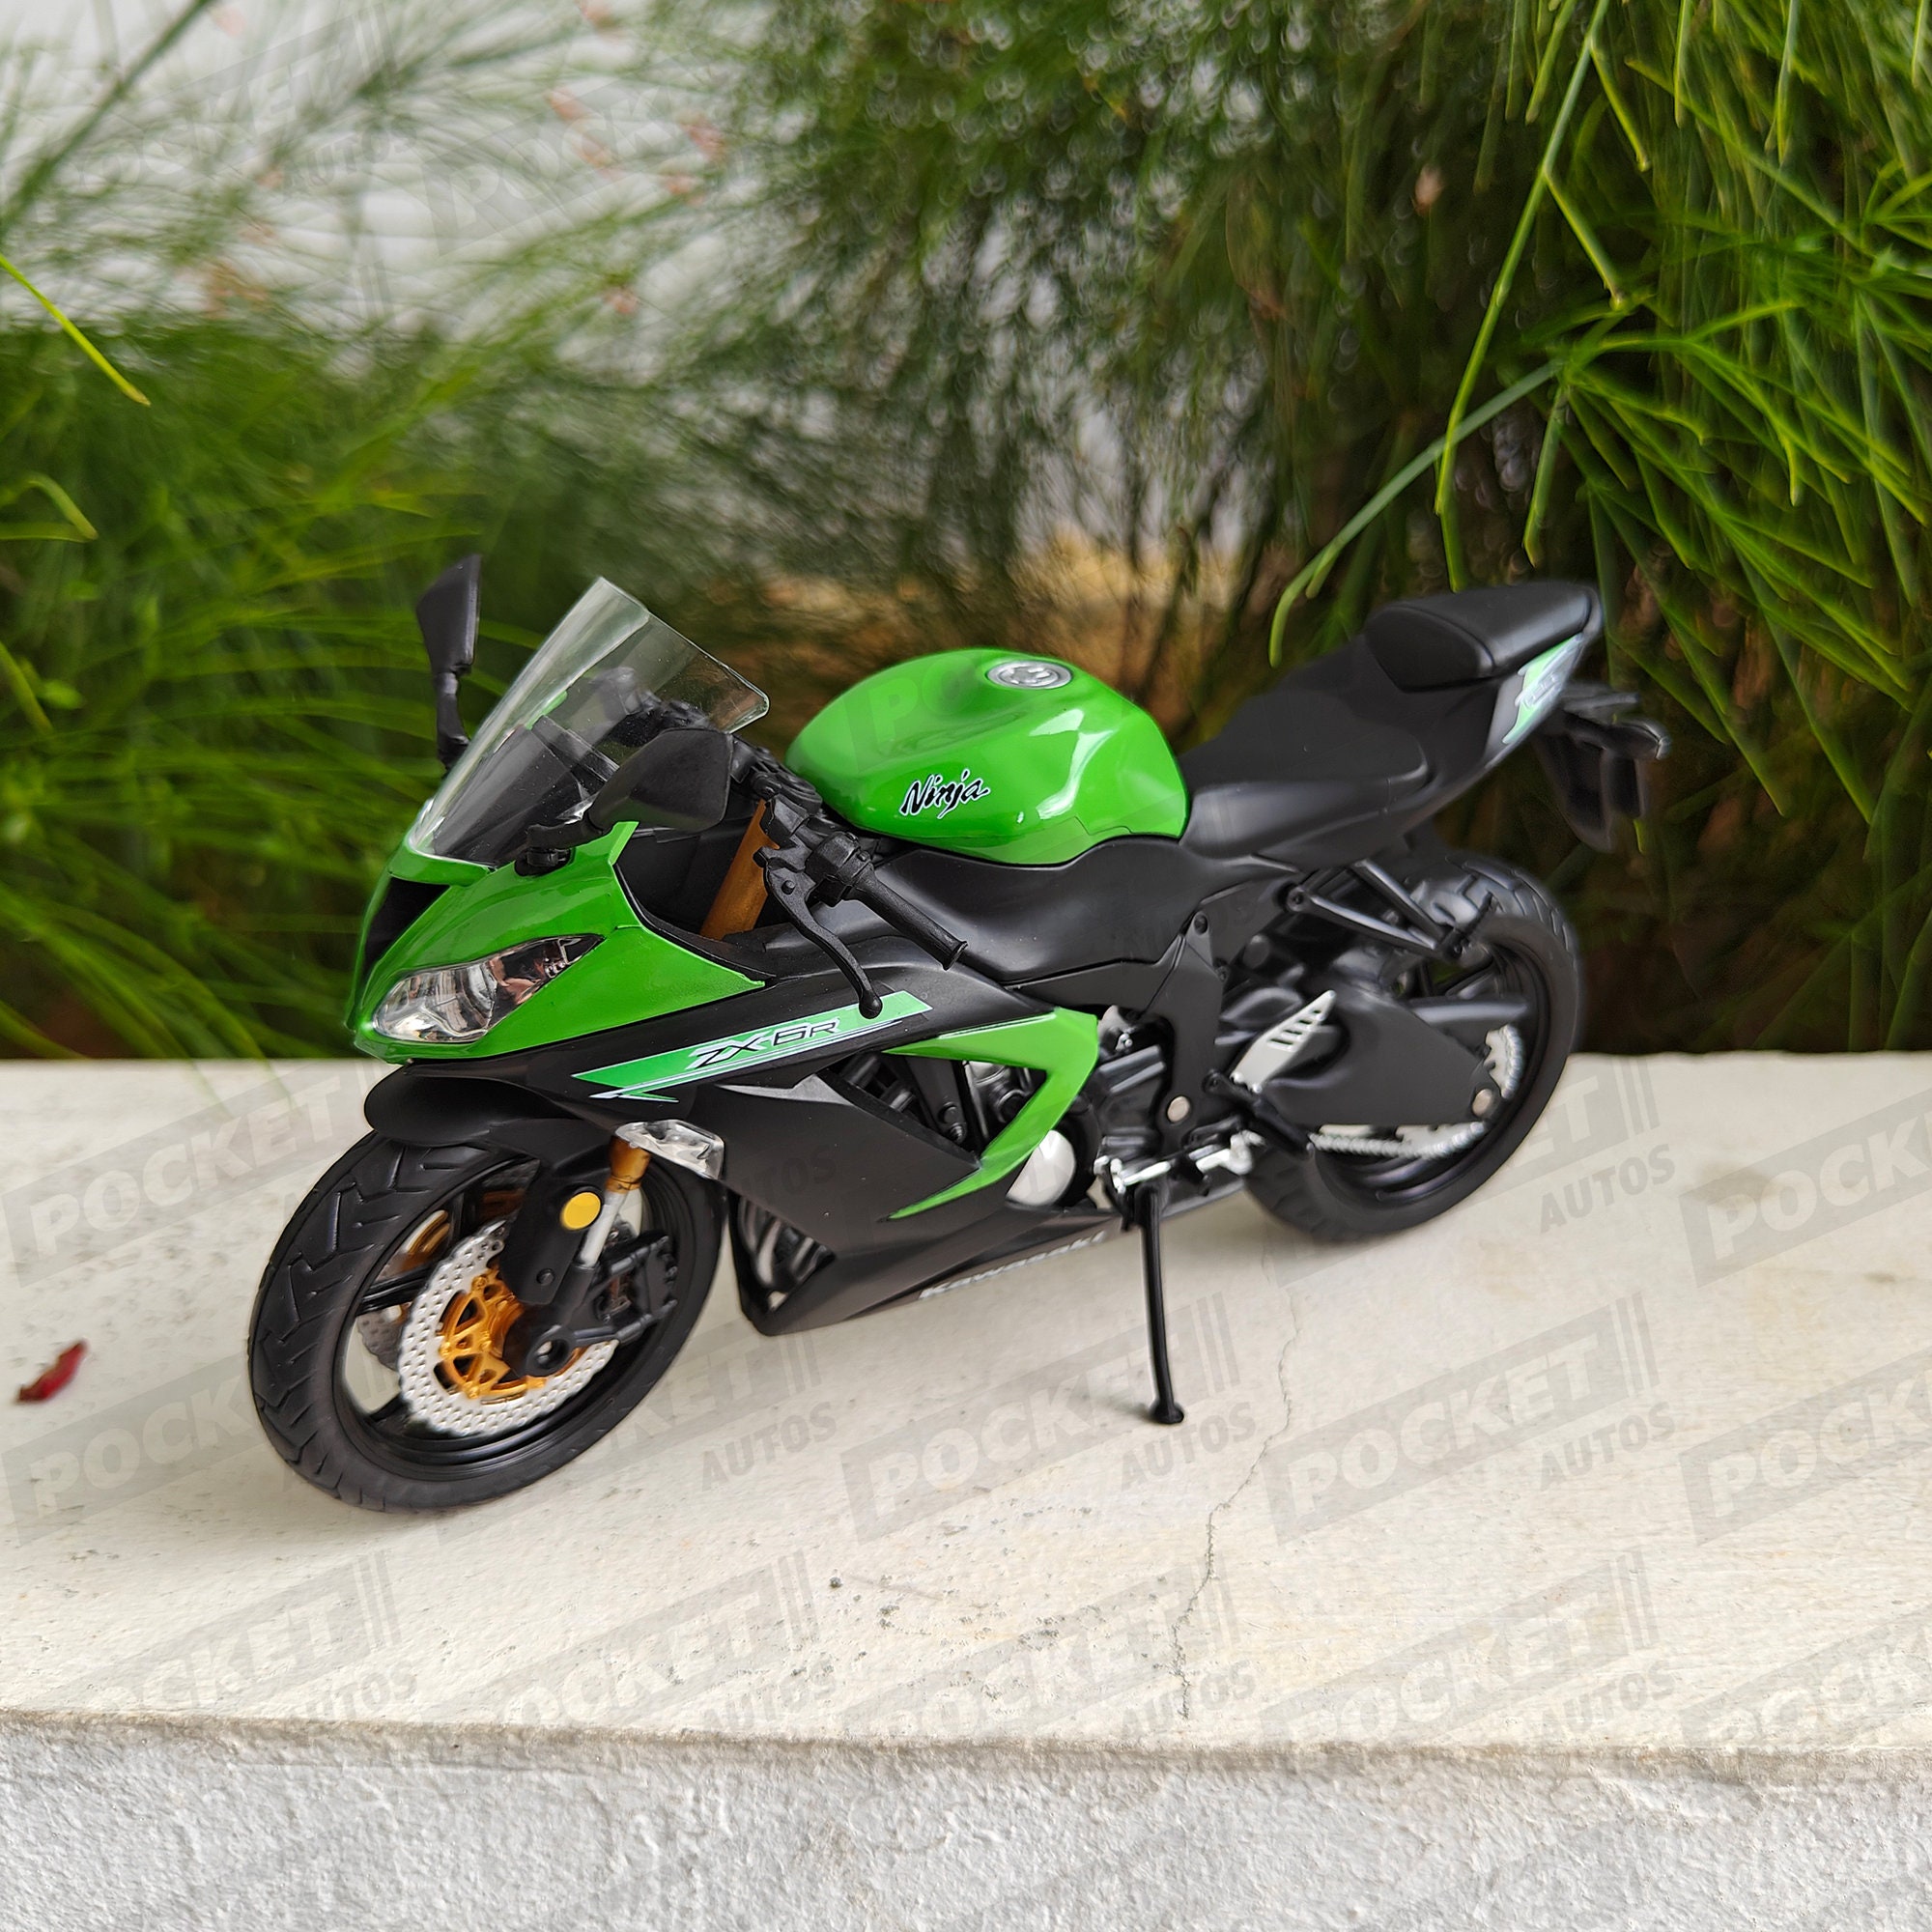 Buy Zx 6r Online In India -  India